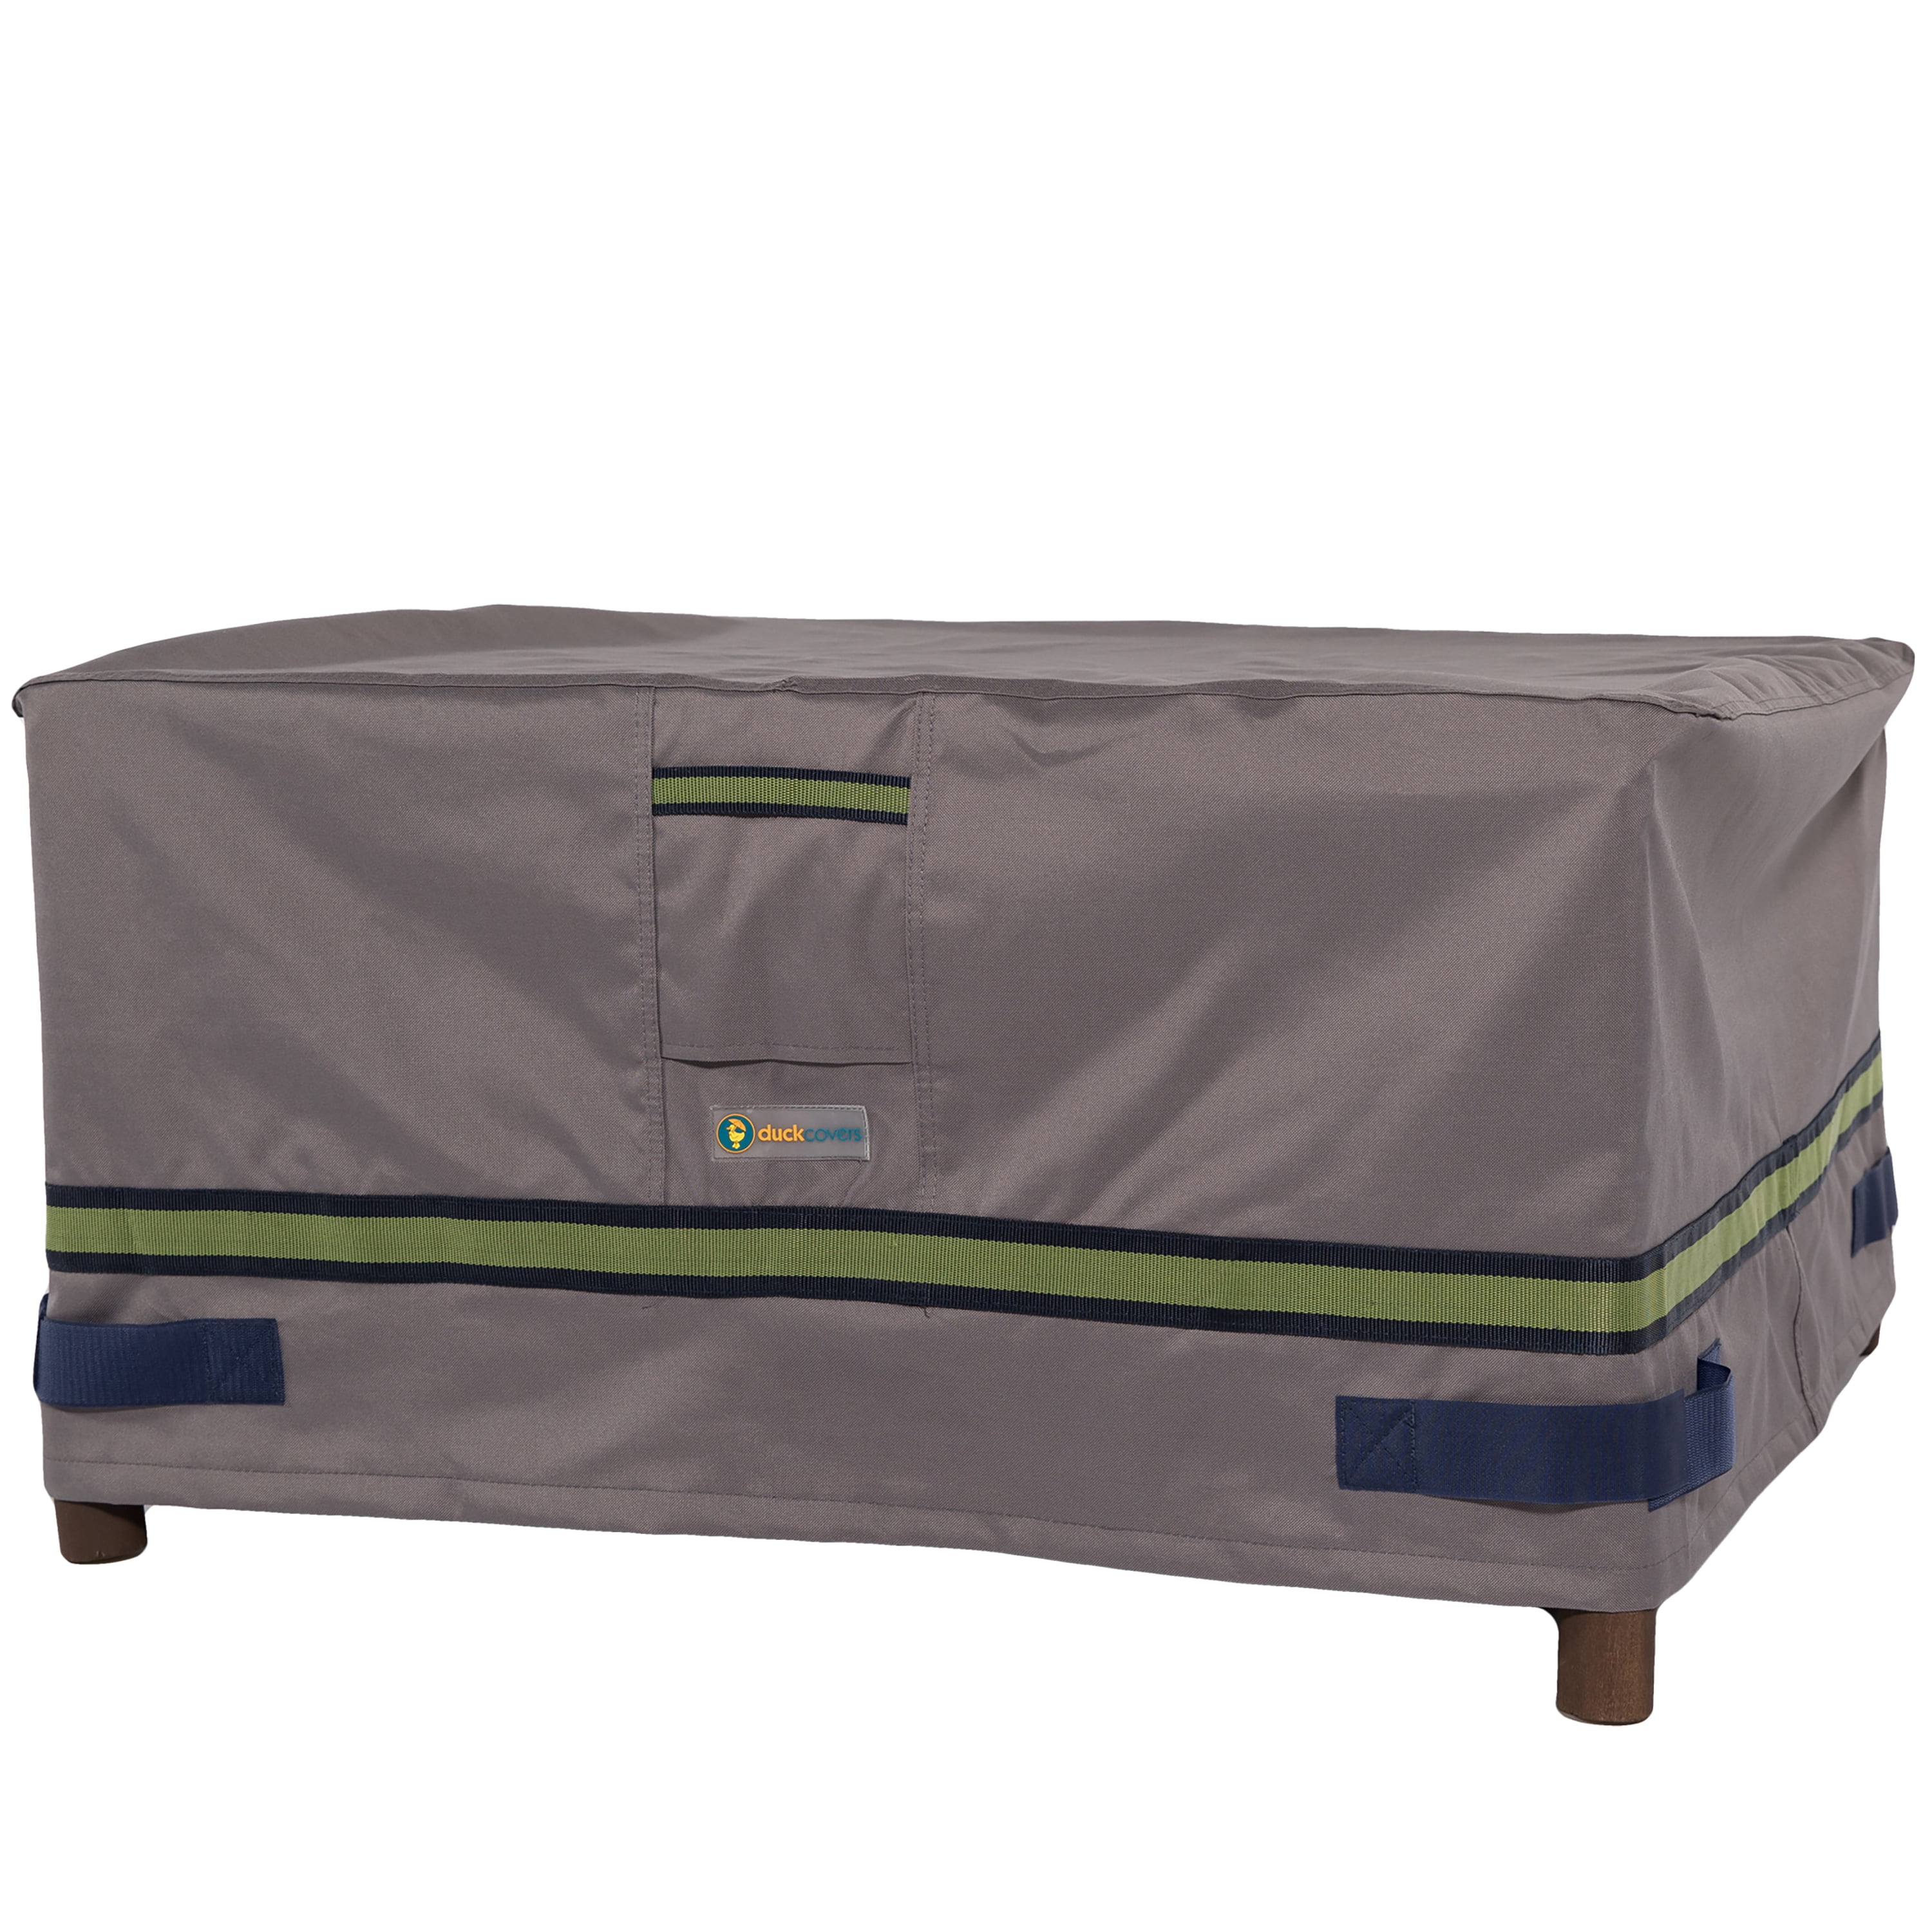 52 L x 30 W x 18 H with Duck Dome Airbag Duck Covers Elegant Rectangular Patio Ottoman or Side Table Cover 36L x 36W 